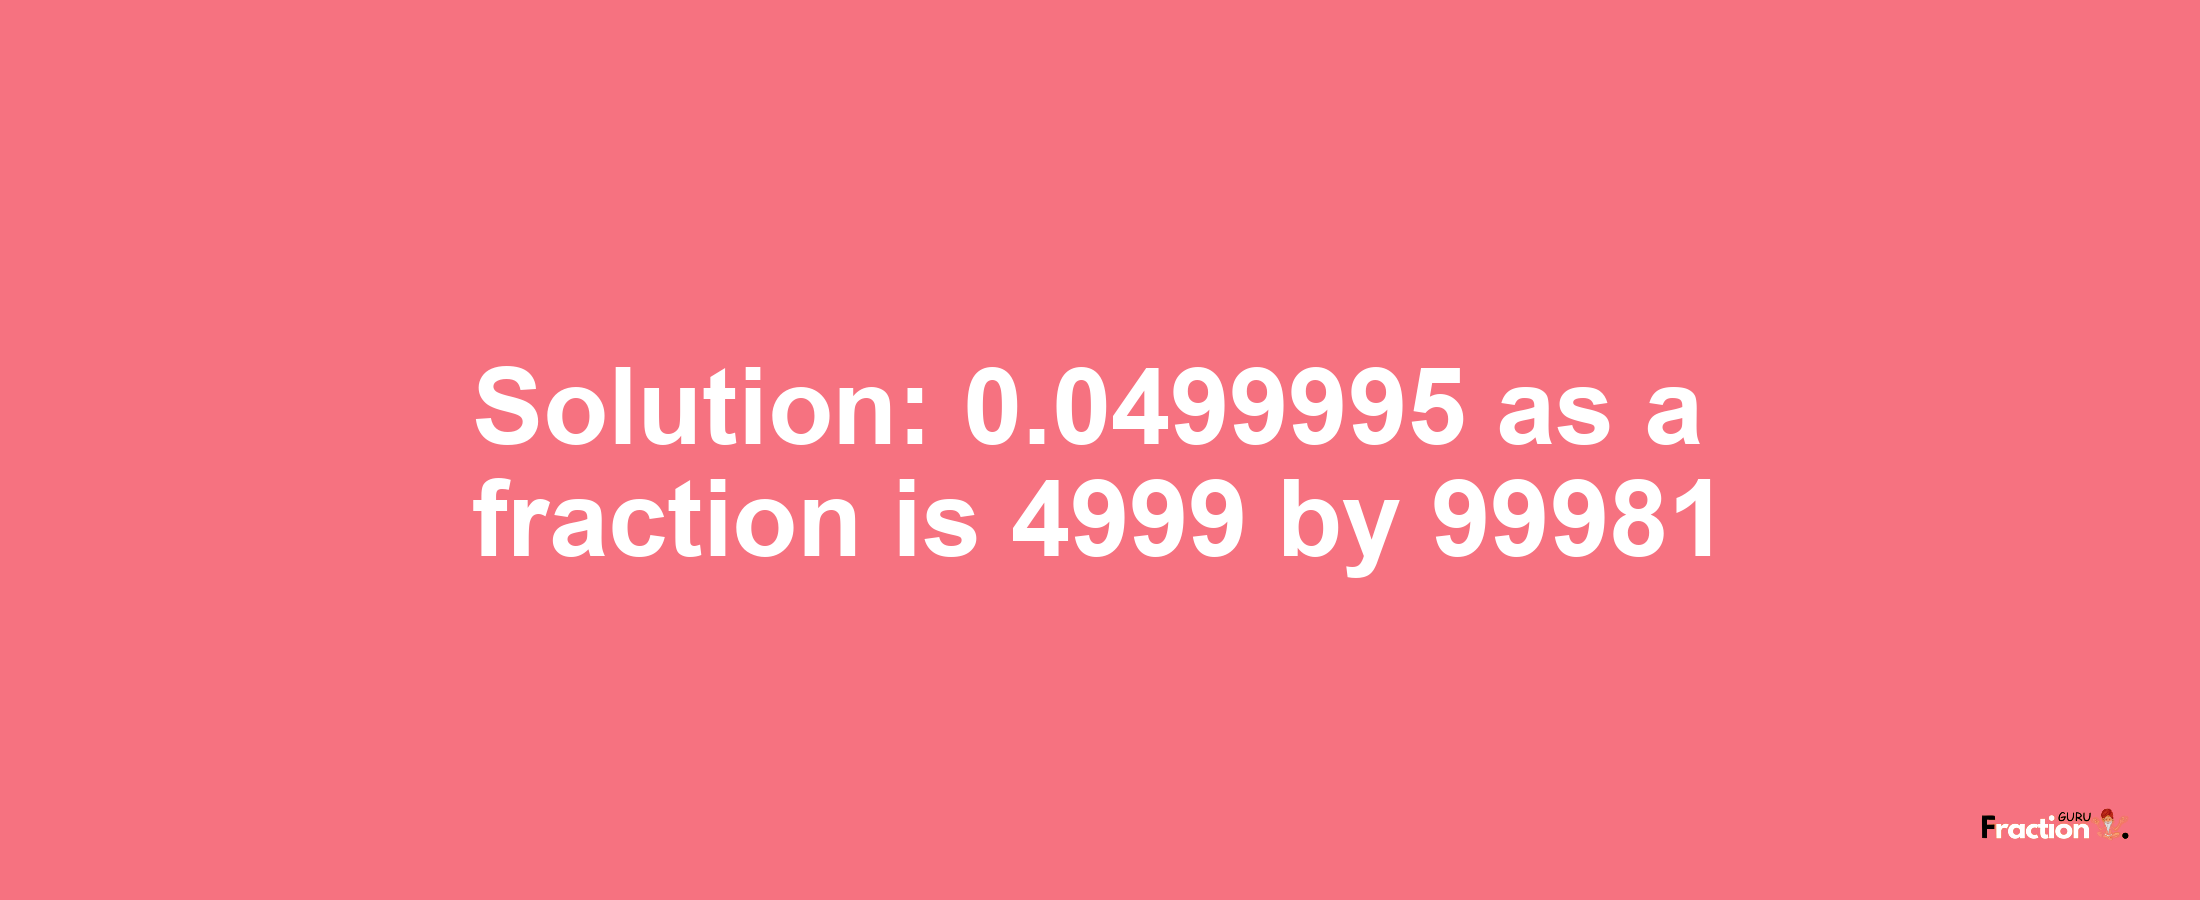 Solution:0.0499995 as a fraction is 4999/99981